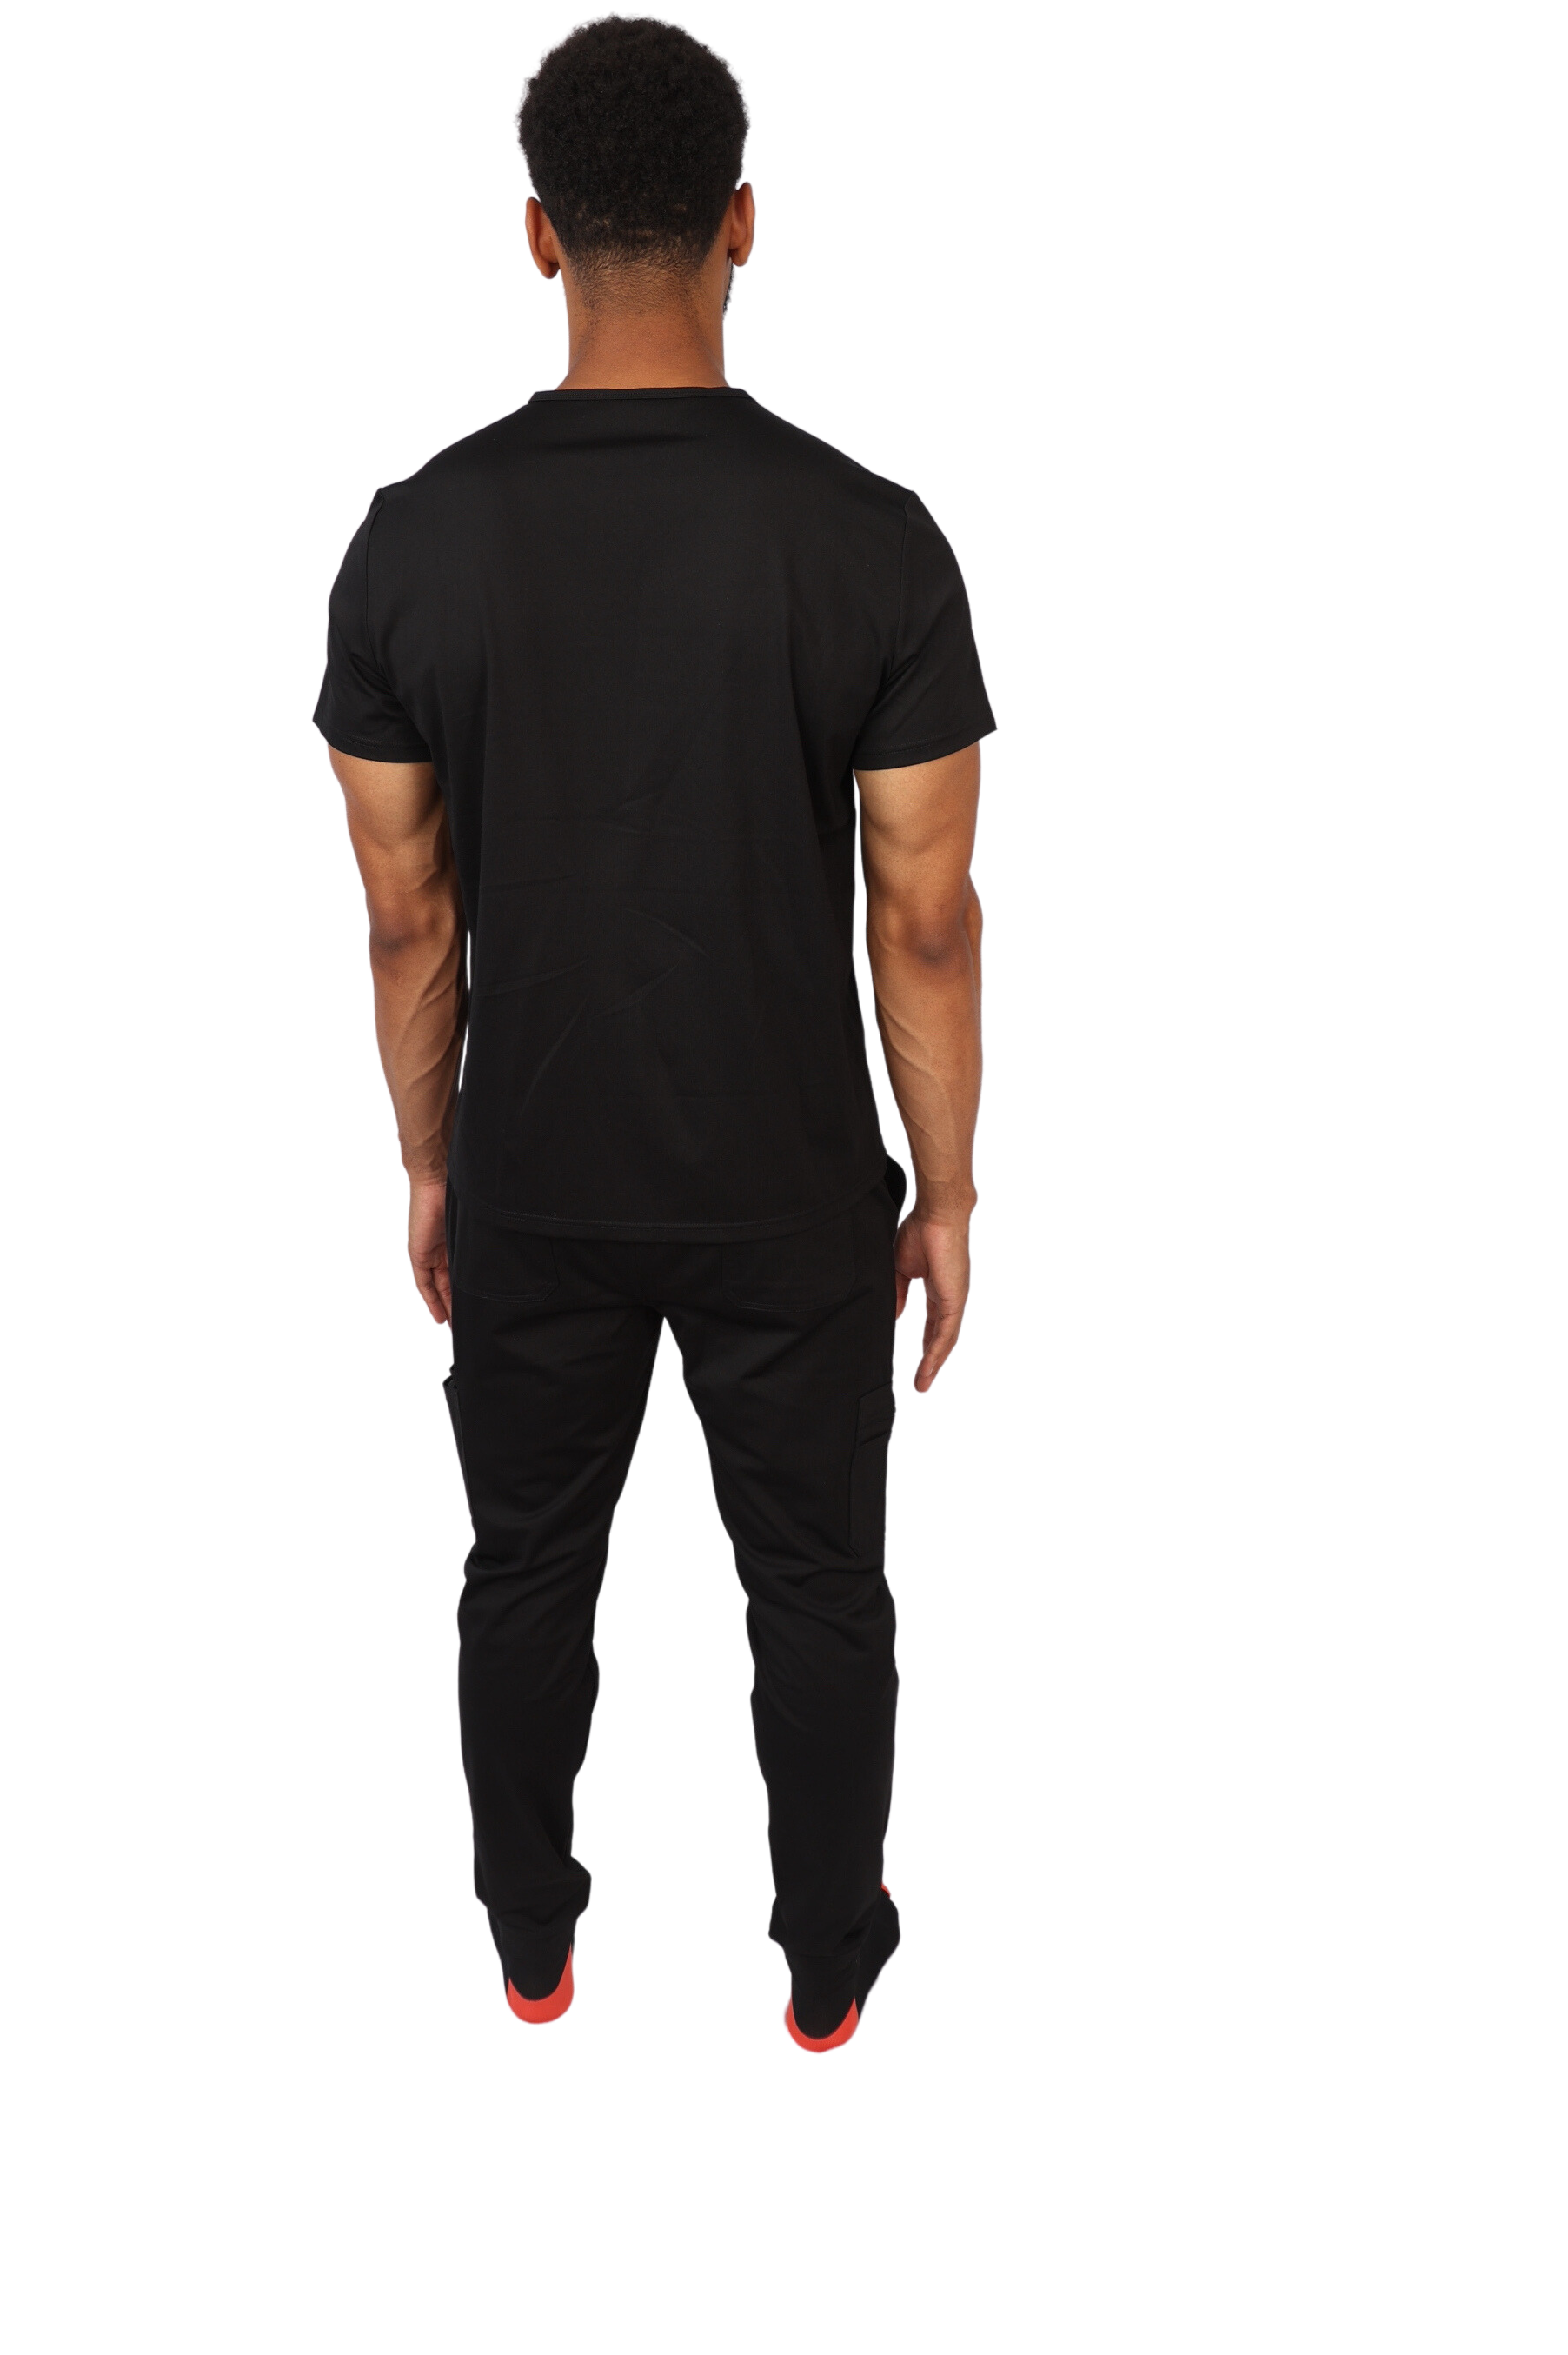 medical work uniform Scrubmates modern fit jogger black scrub pants for men made to pair perfectly with our modern fit scrub top. Our exclusive design is on trend, professional and stylish. Made from a superior quality nylon/rayon/spandex fabric mix, this set offers unparalleled all-day comfort and the ultimate amount of stretch. Our thoughtful and innovative design offers 8 deep pants pockets. best scrubs for men figs scrubs